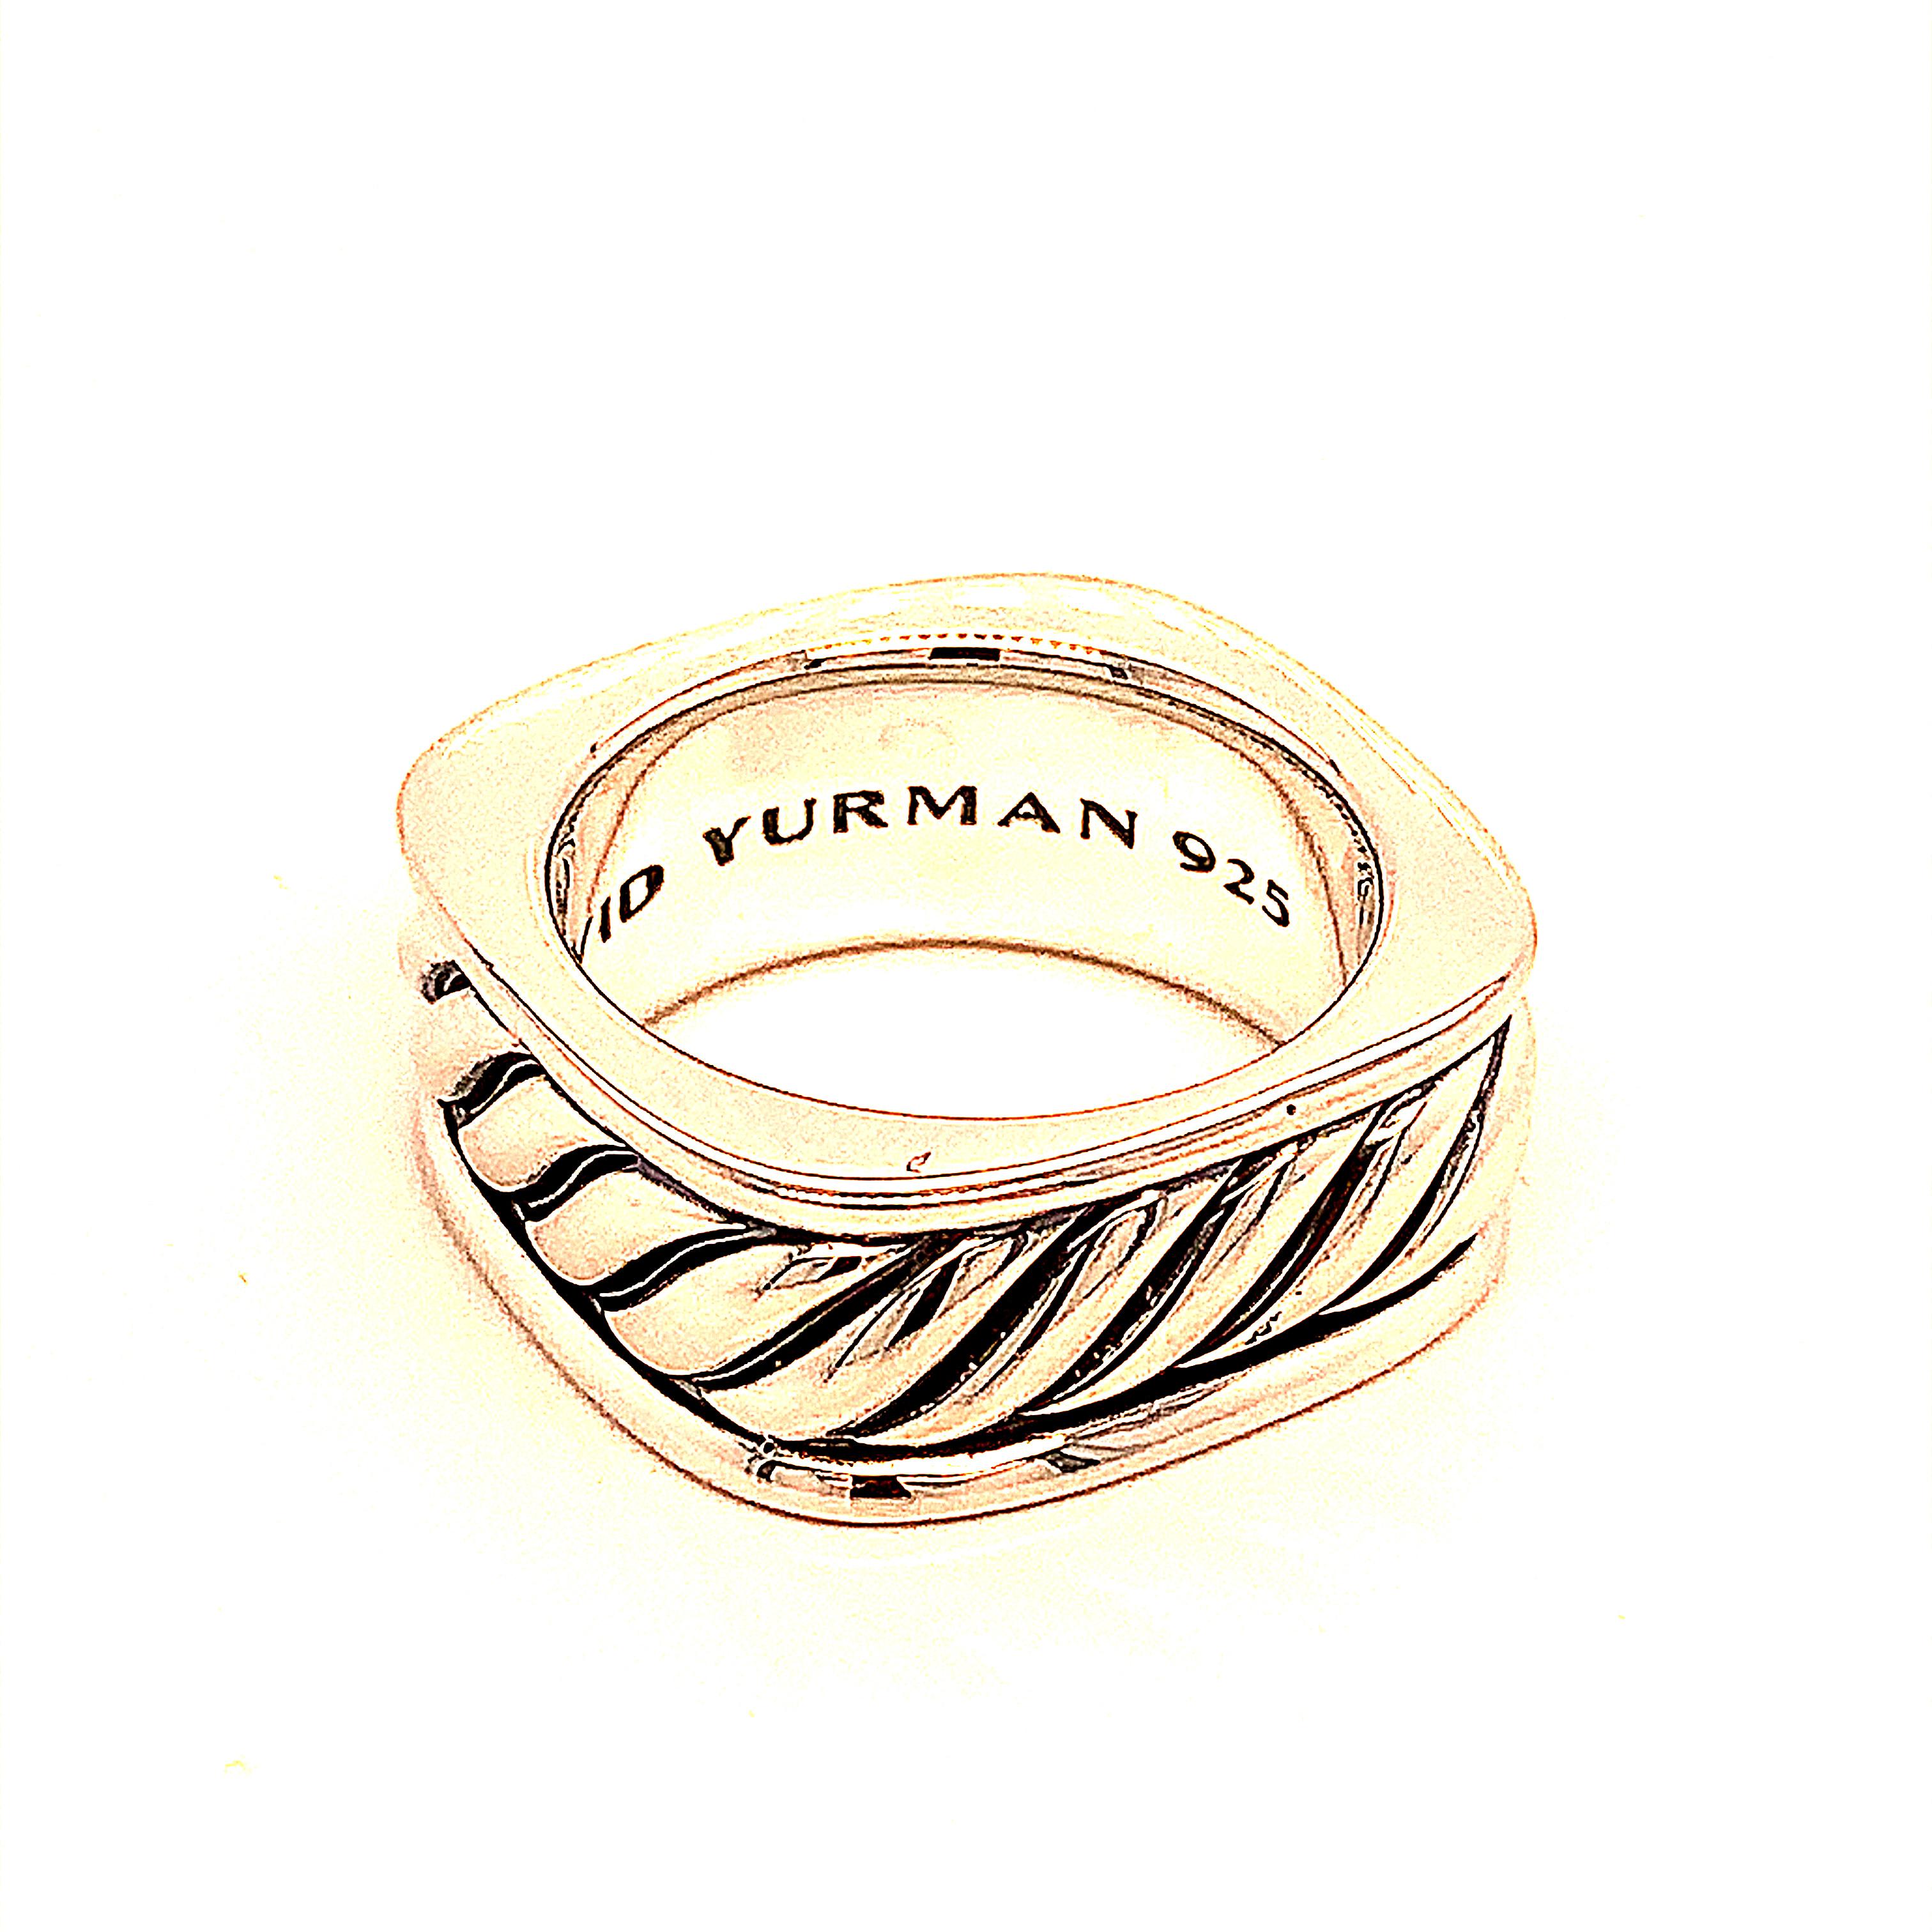 David Yurman Estate Men's Ring Size 8 Sterling Silver 17.1 Grams DY35
 
This elegant Authentic David Yurman ring is made of sterling silver and has a weight of 17.1 grams.

TRUSTED SELLER SINCE 2002
 
PLEASE SEE OUR HUNDREDS OF POSITIVE FEEDBACKS